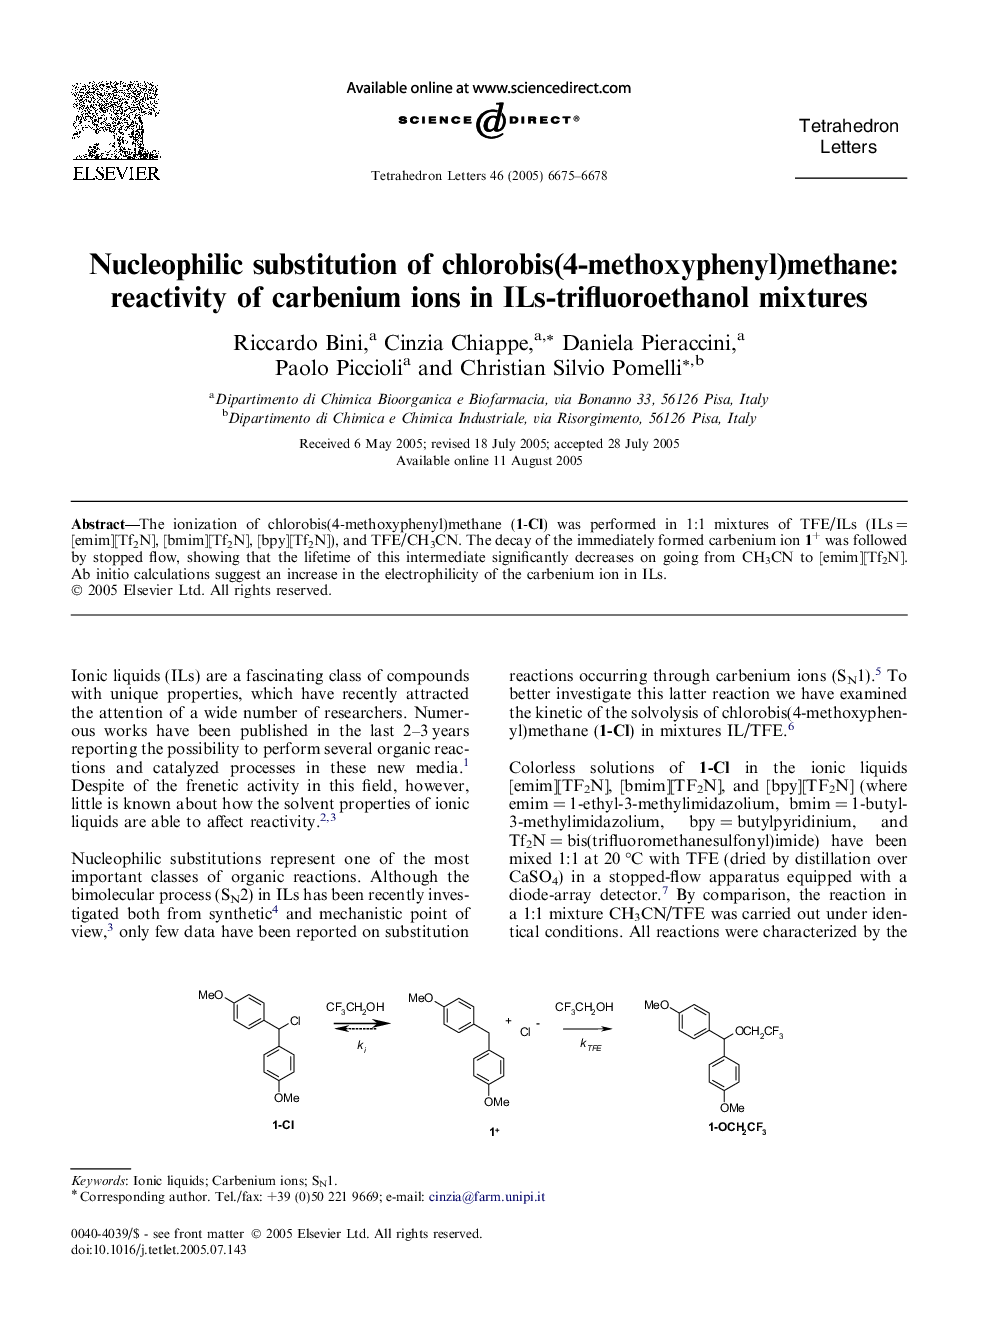 Nucleophilic substitution of chlorobis(4-methoxyphenyl)methane: reactivity of carbenium ions in ILs-trifluoroethanol mixtures